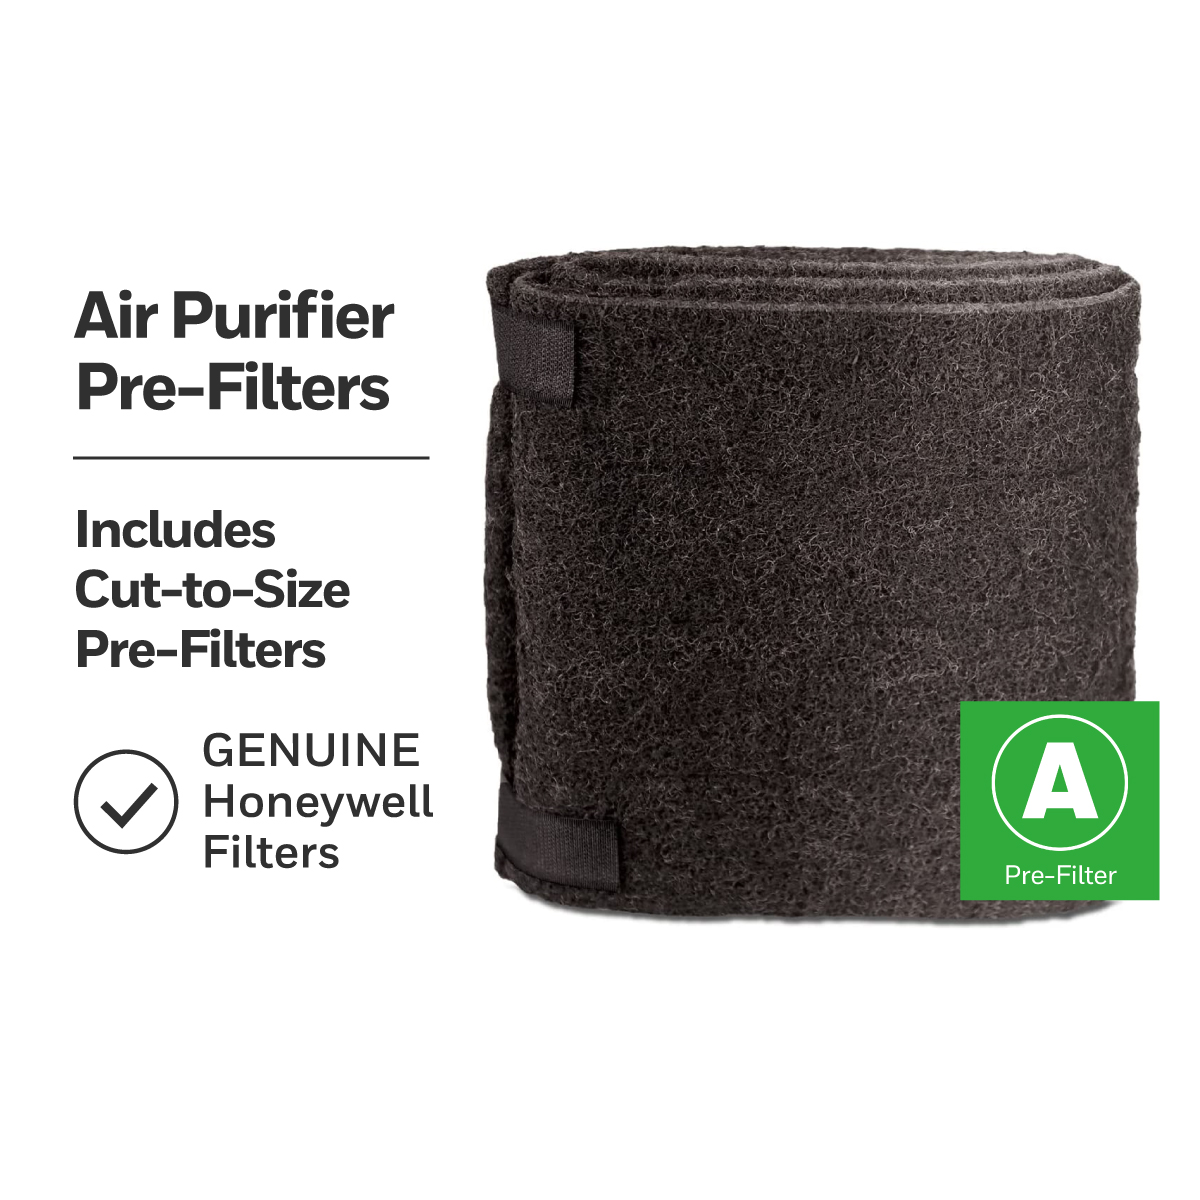 Honeywell Air Purifier Replacement Filter, HRF-AP1, A Pre Filter, 1 Pack - image 3 of 6